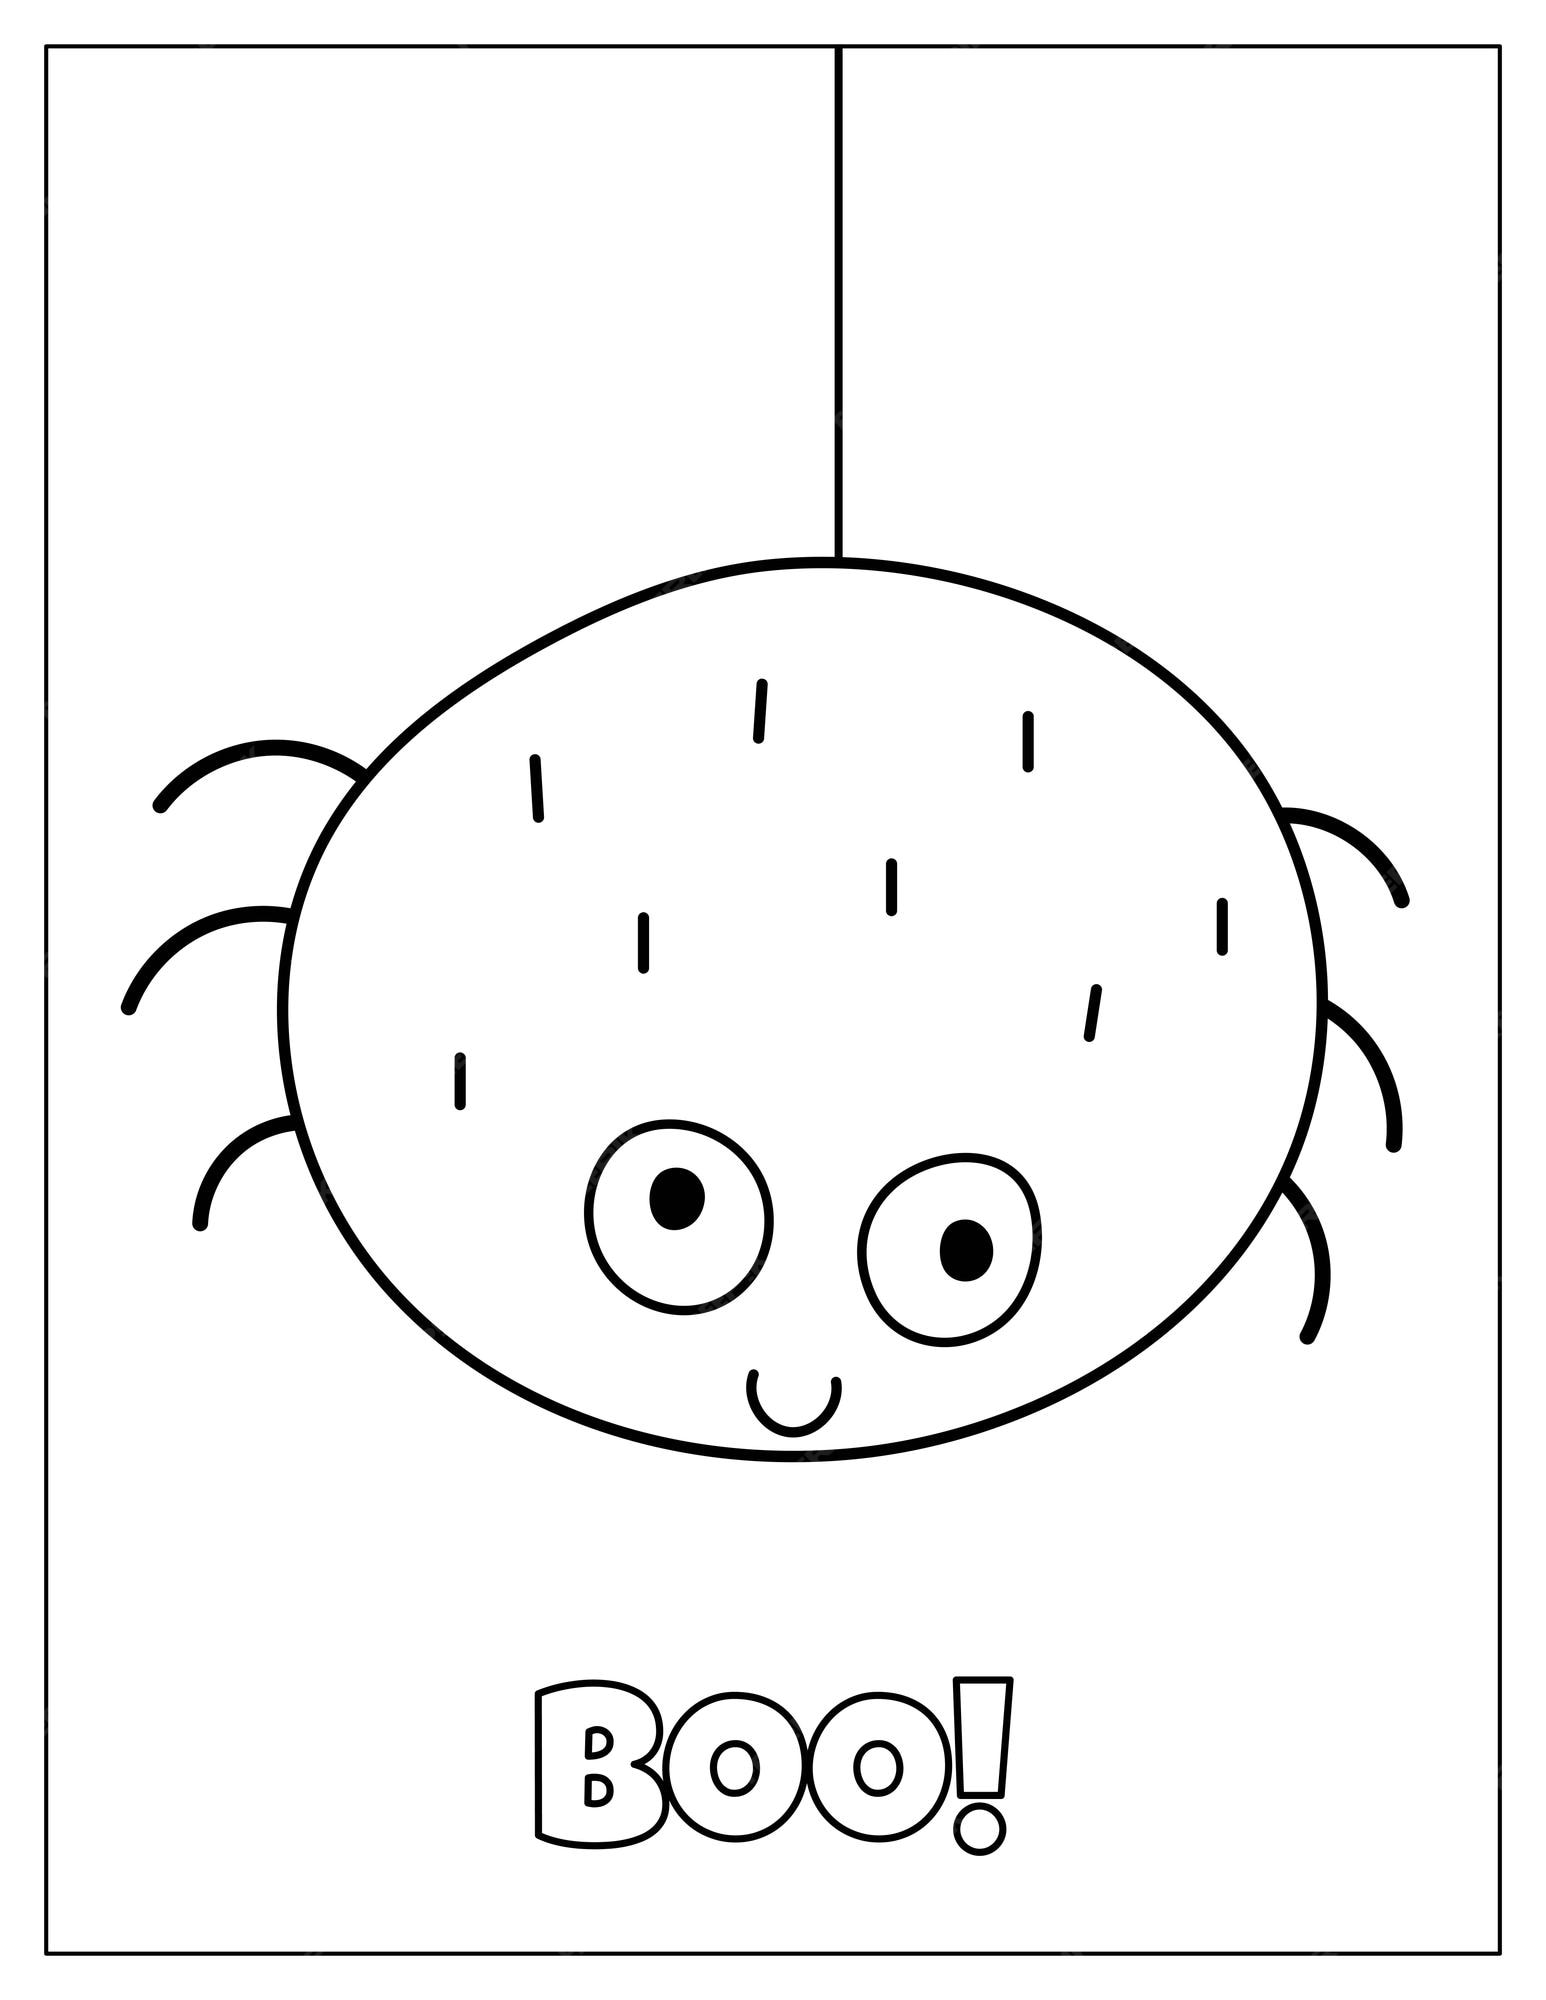 Premium vector boo halloween coloring page with a cute spider hanging on a web kids print for coloring book